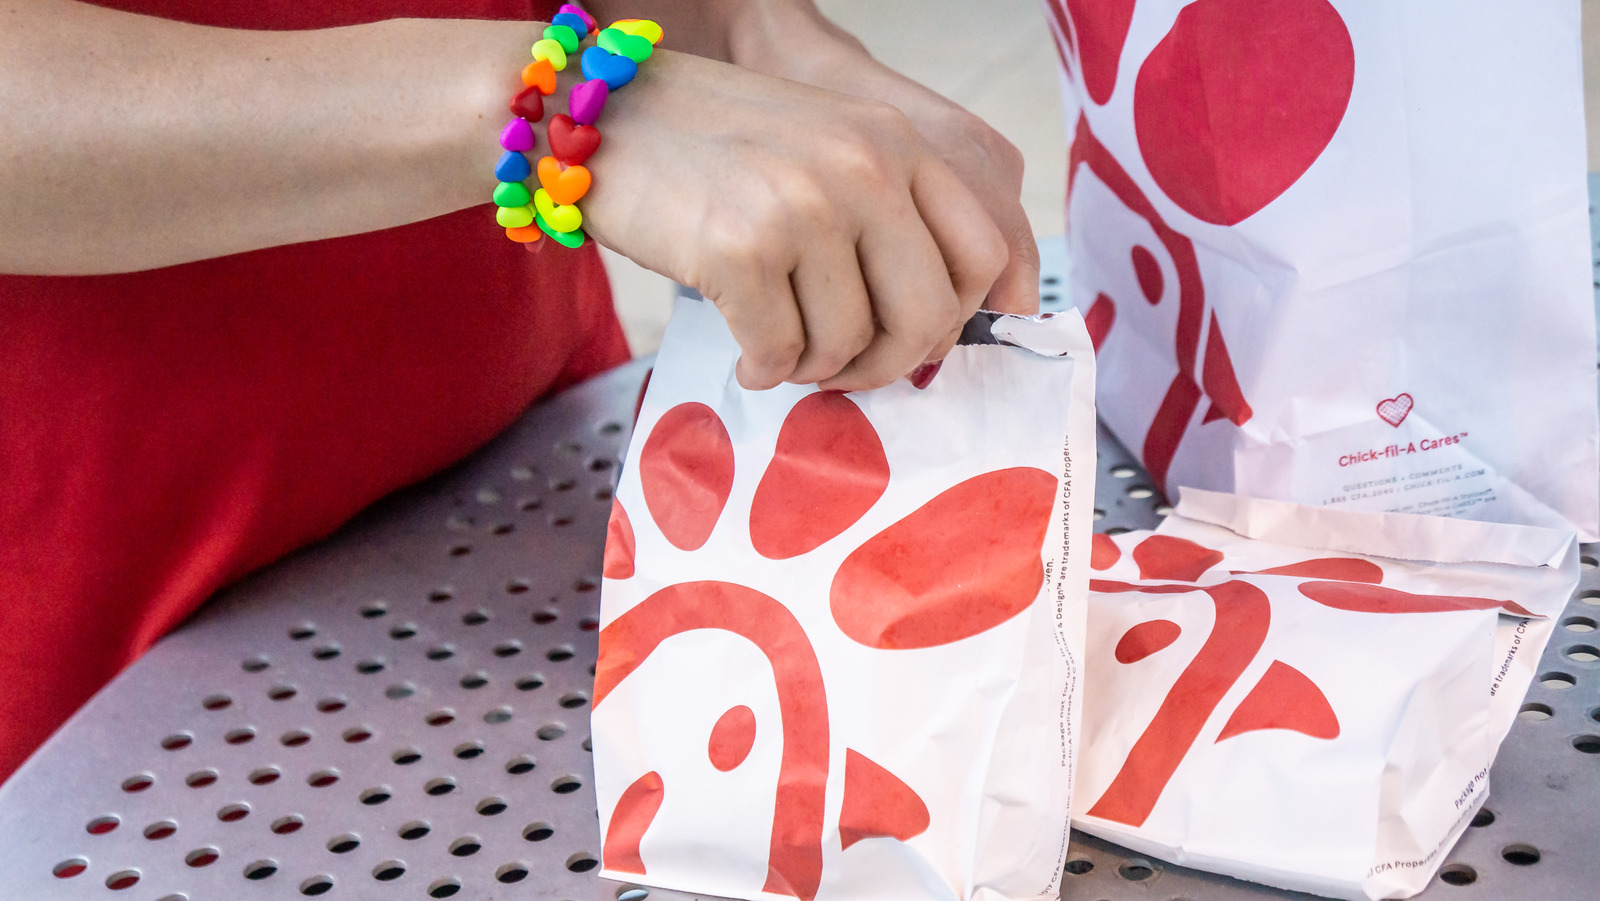 The TikTok Chick-Fil-A Hack For Easy Hot Honey Chicken